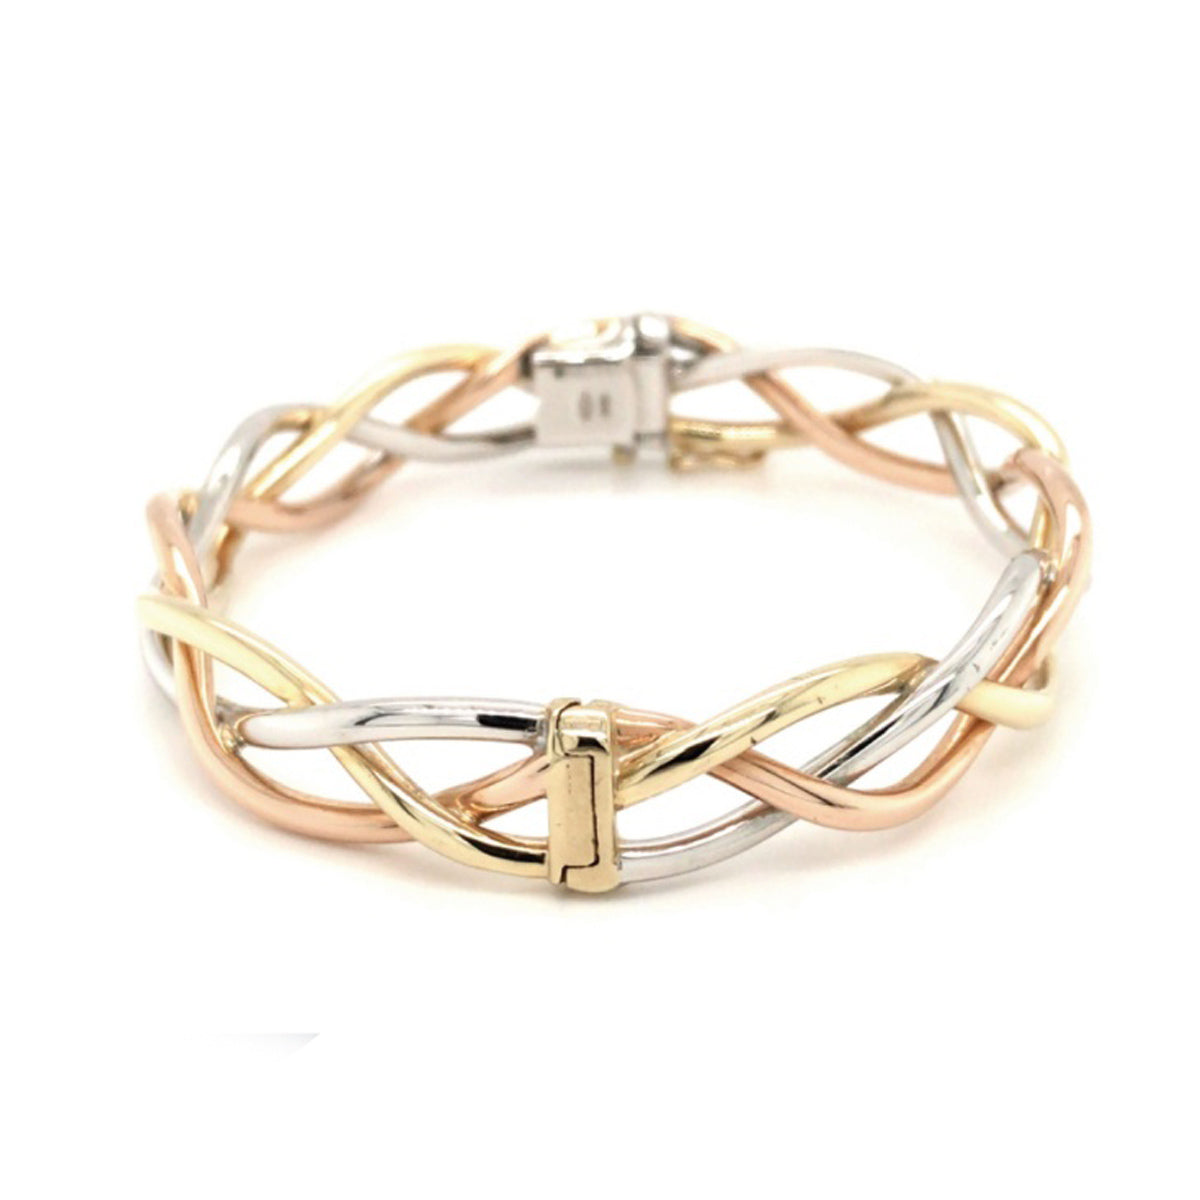 9ct Yellow, White and Rose Gold Twist Bracelet